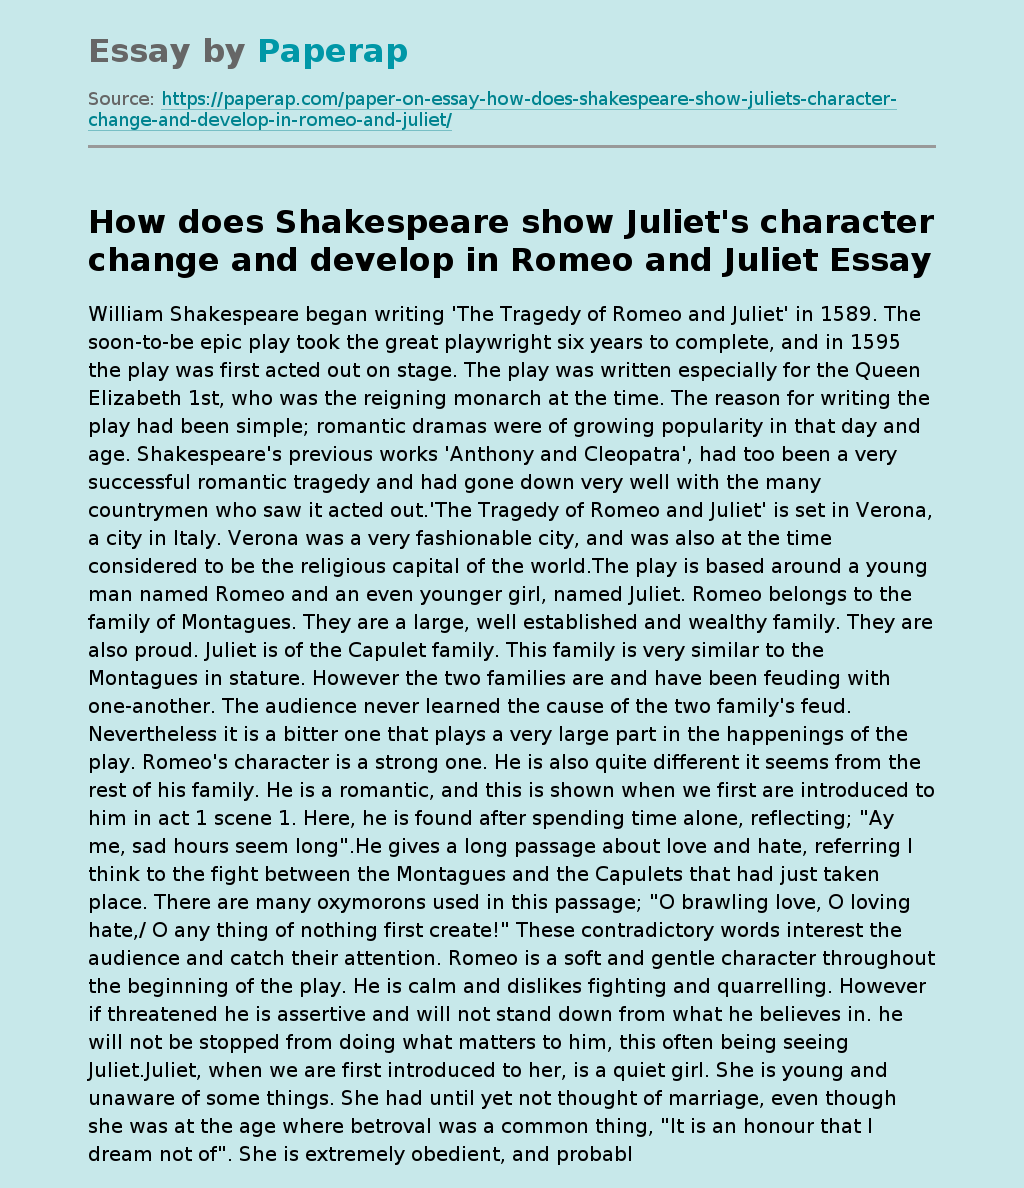 How does Shakespeare show Juliet's character change and develop in Romeo and Juliet